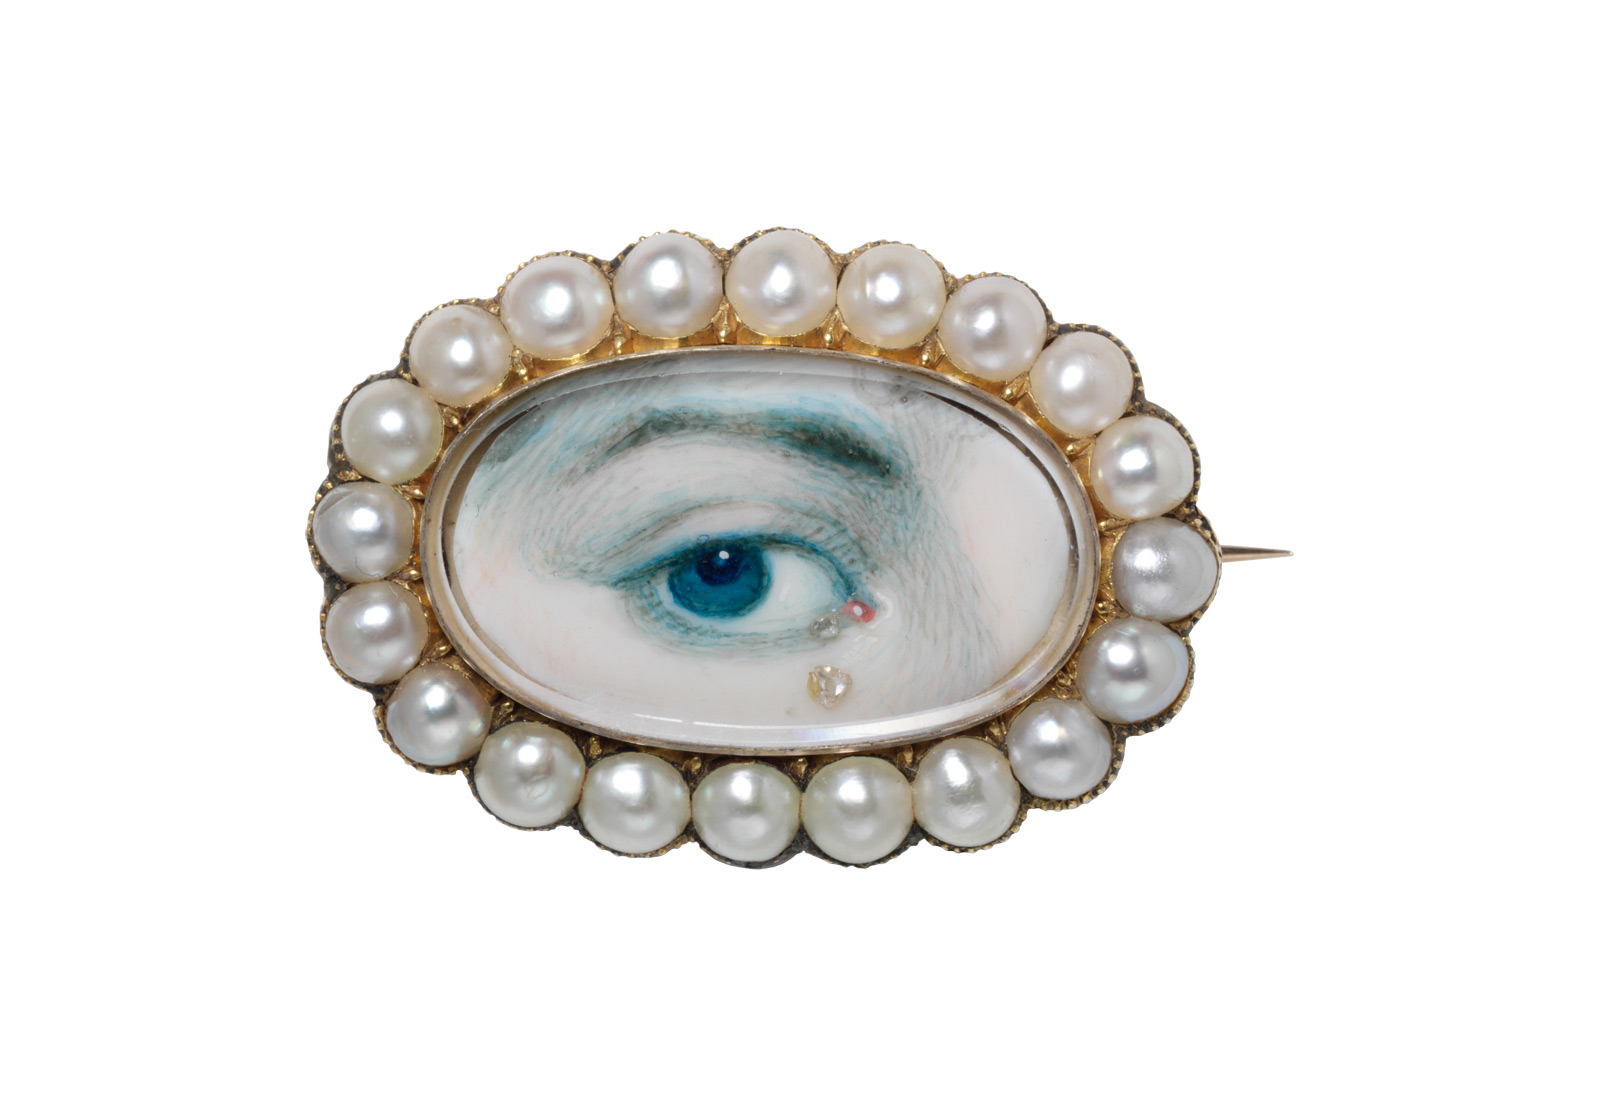 'Lover's Eye' brooch c. early 19th Century, displayed at Victoria and Albert Museum, London